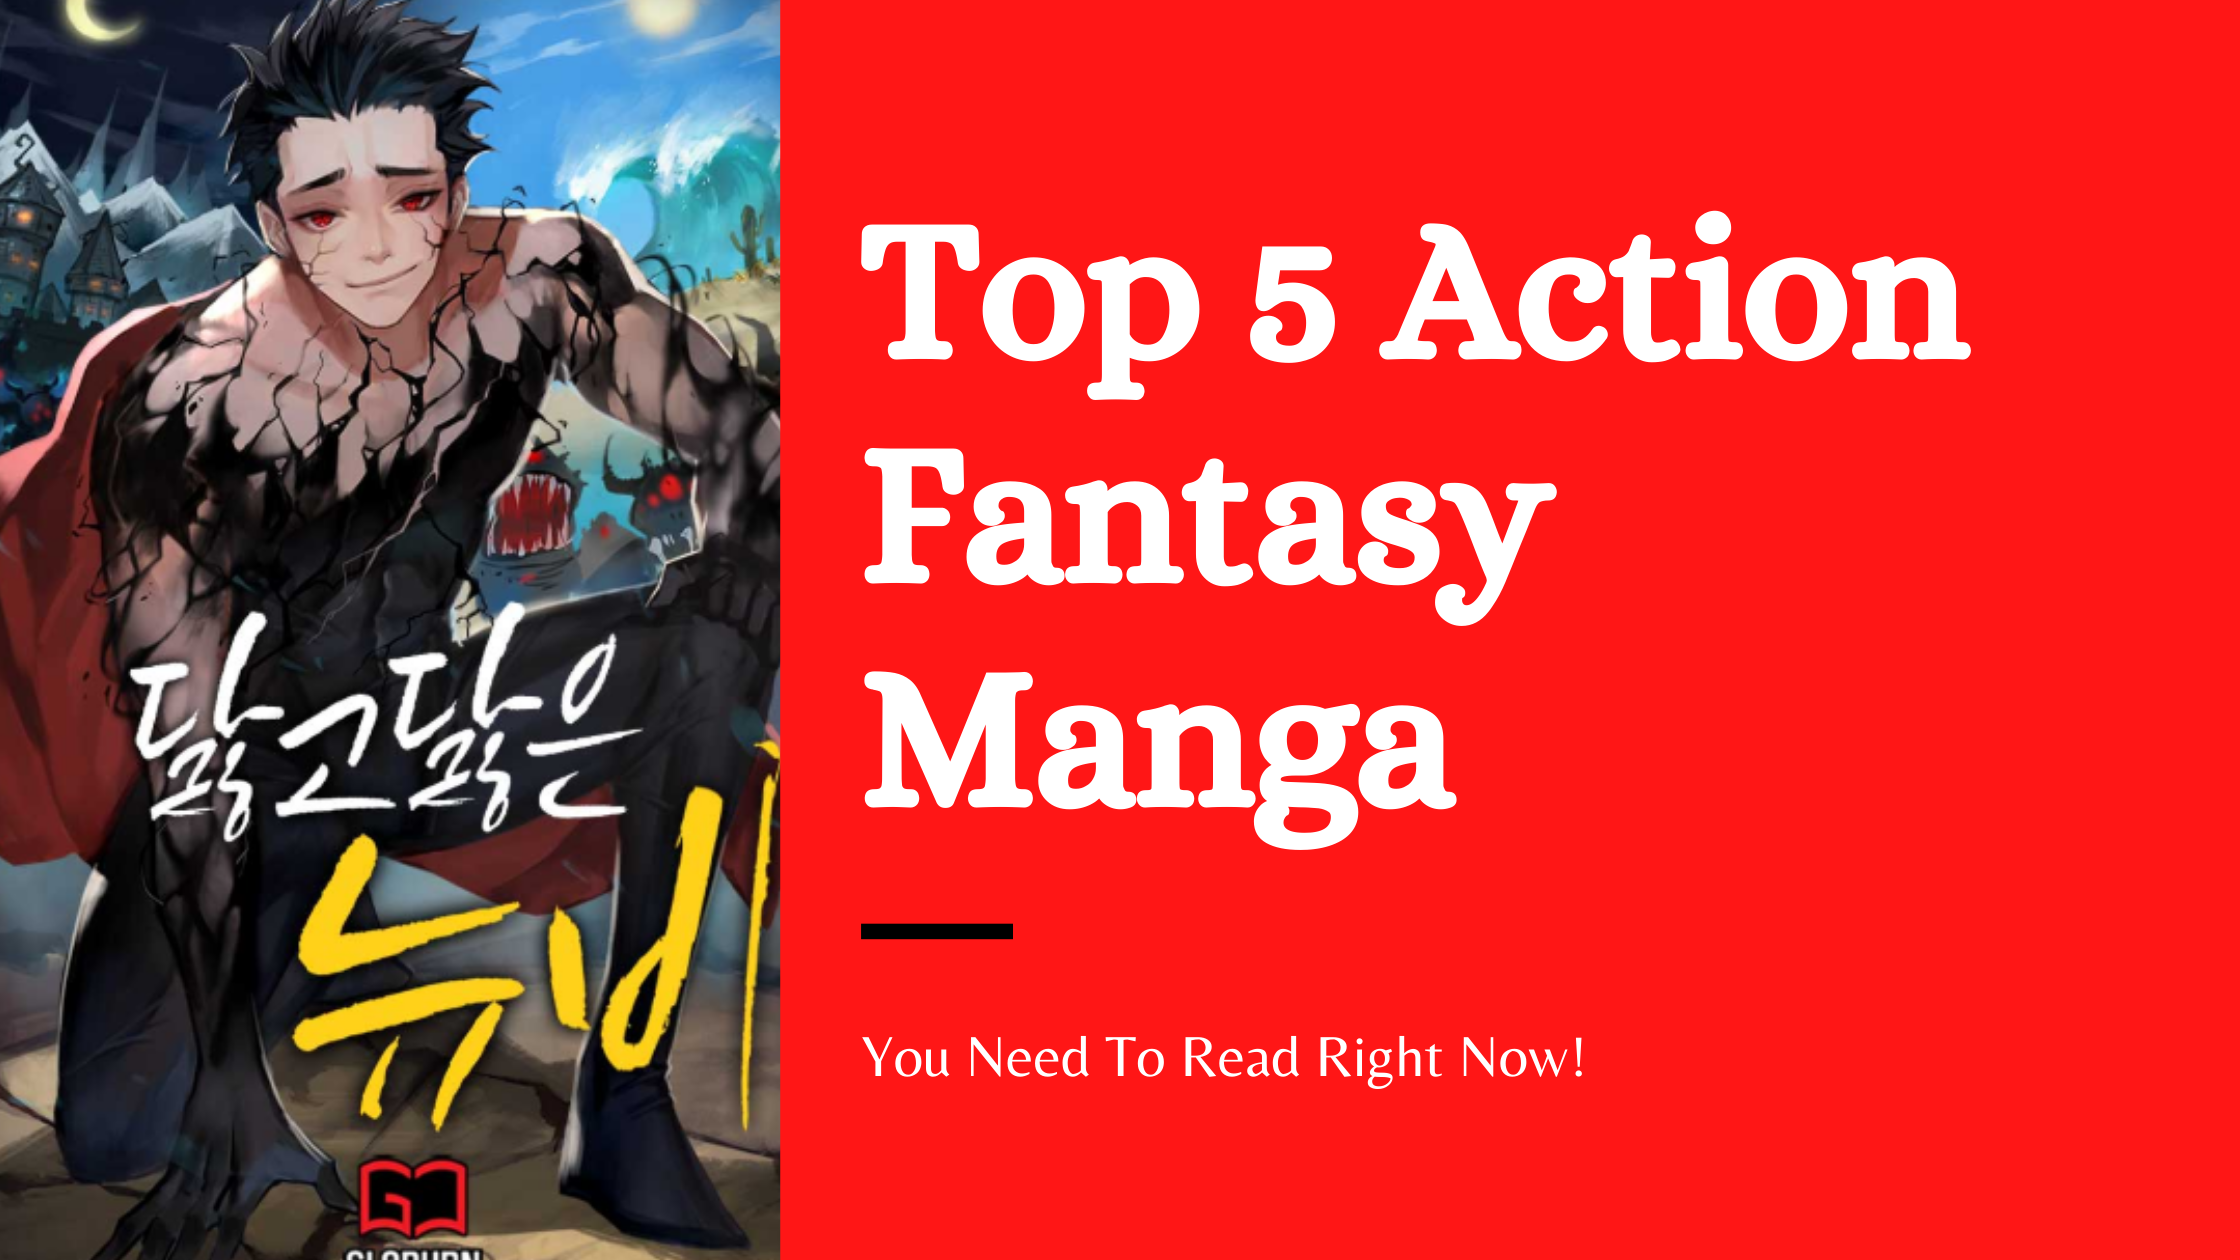 Top 5 Action Fantasy Manga/Manhwa With OP MC (You Need To Read Right